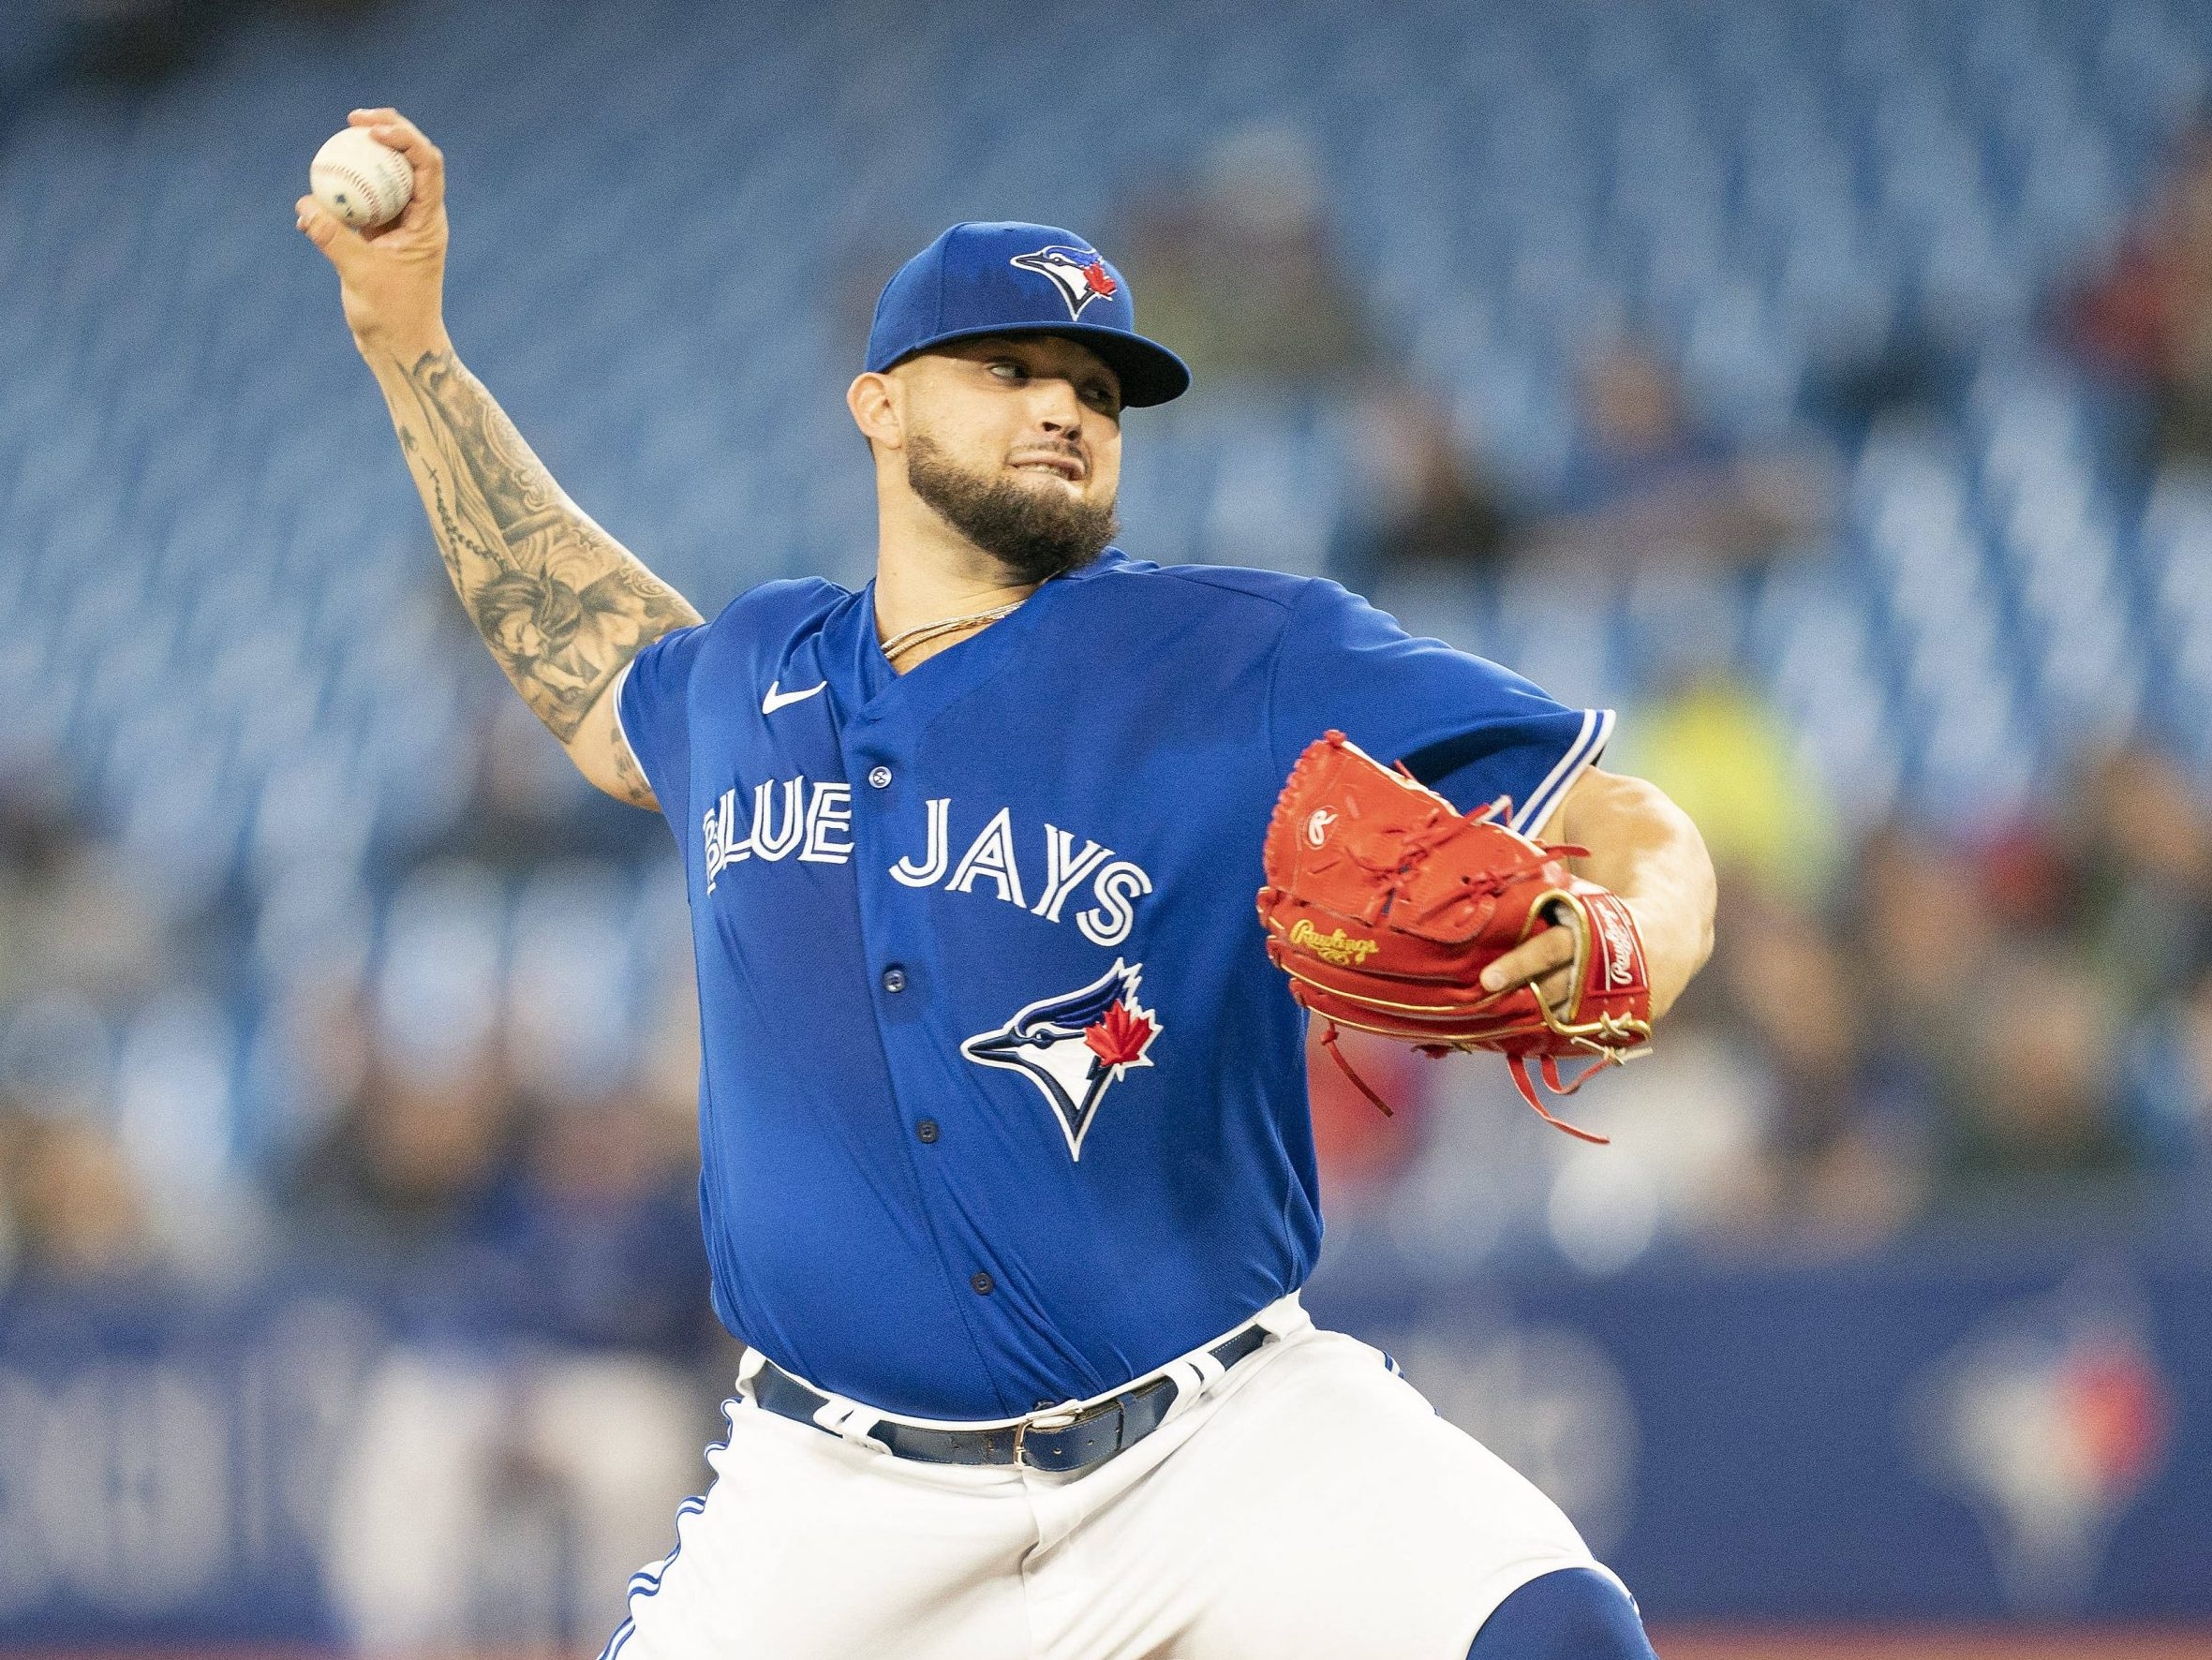 Manoah weaves his mound magic as Jays take three of four vs Red Sox ...